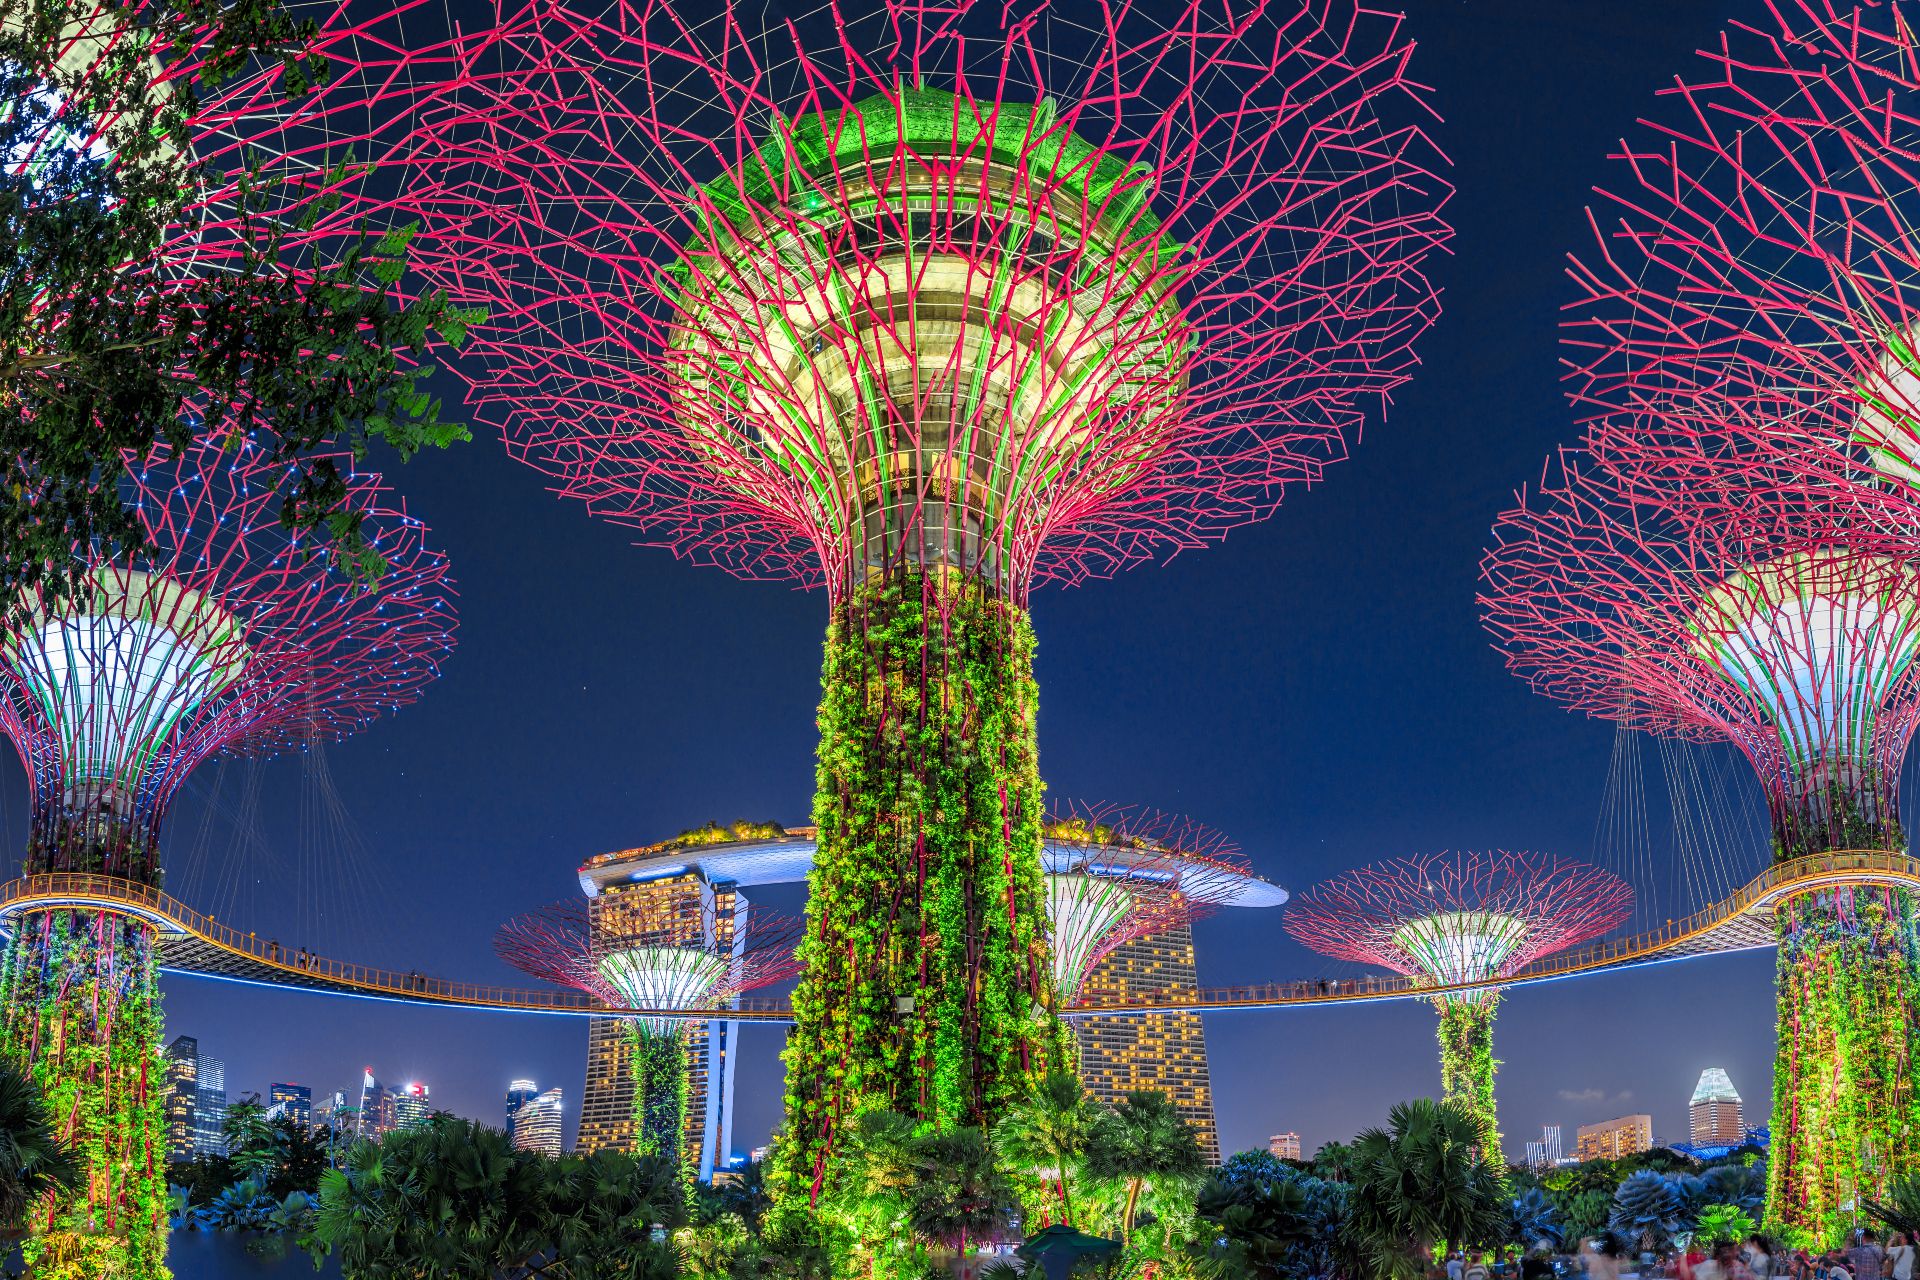 Panorama of the Supertree Grove with colorful lighting at blue hour in Singapore, Southeast Asia. Popular tourist attraction in marina bay area.